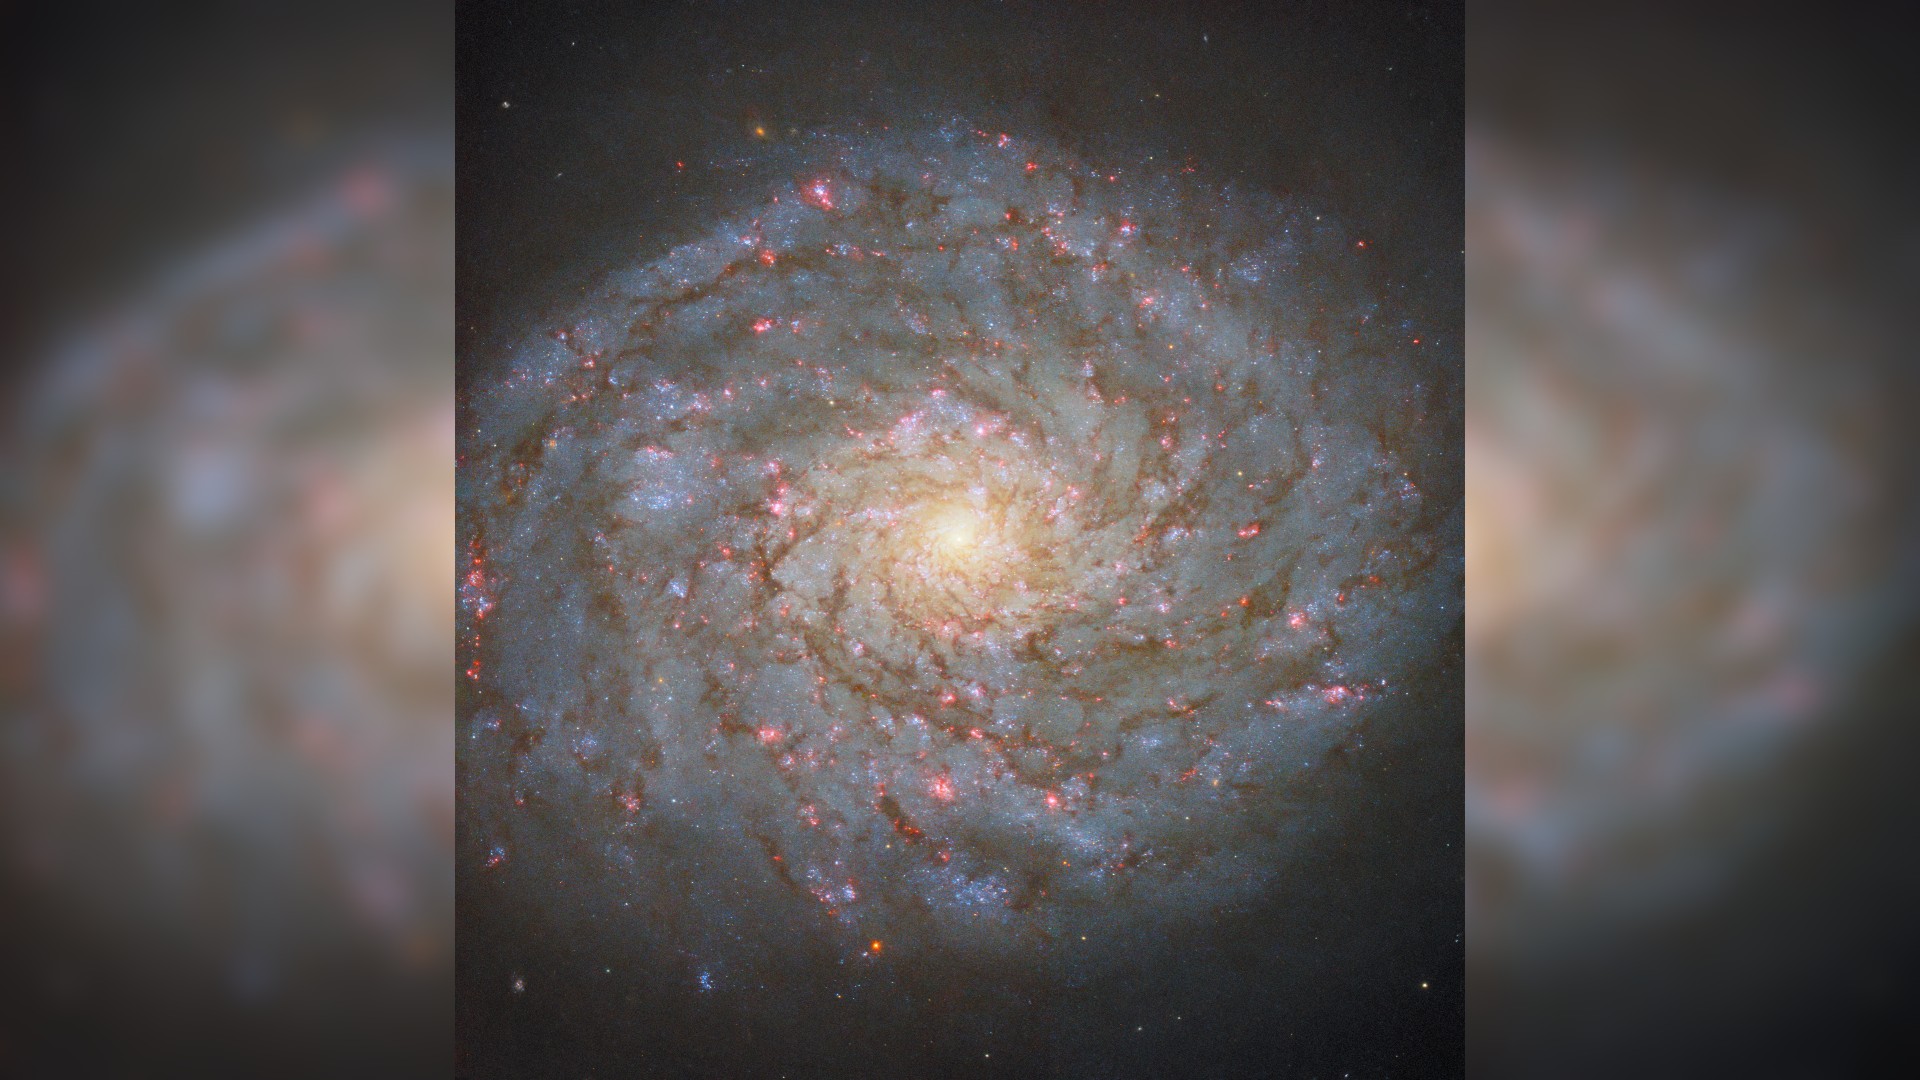 Bejeweled galaxy sparkles in new Hubble photo Space